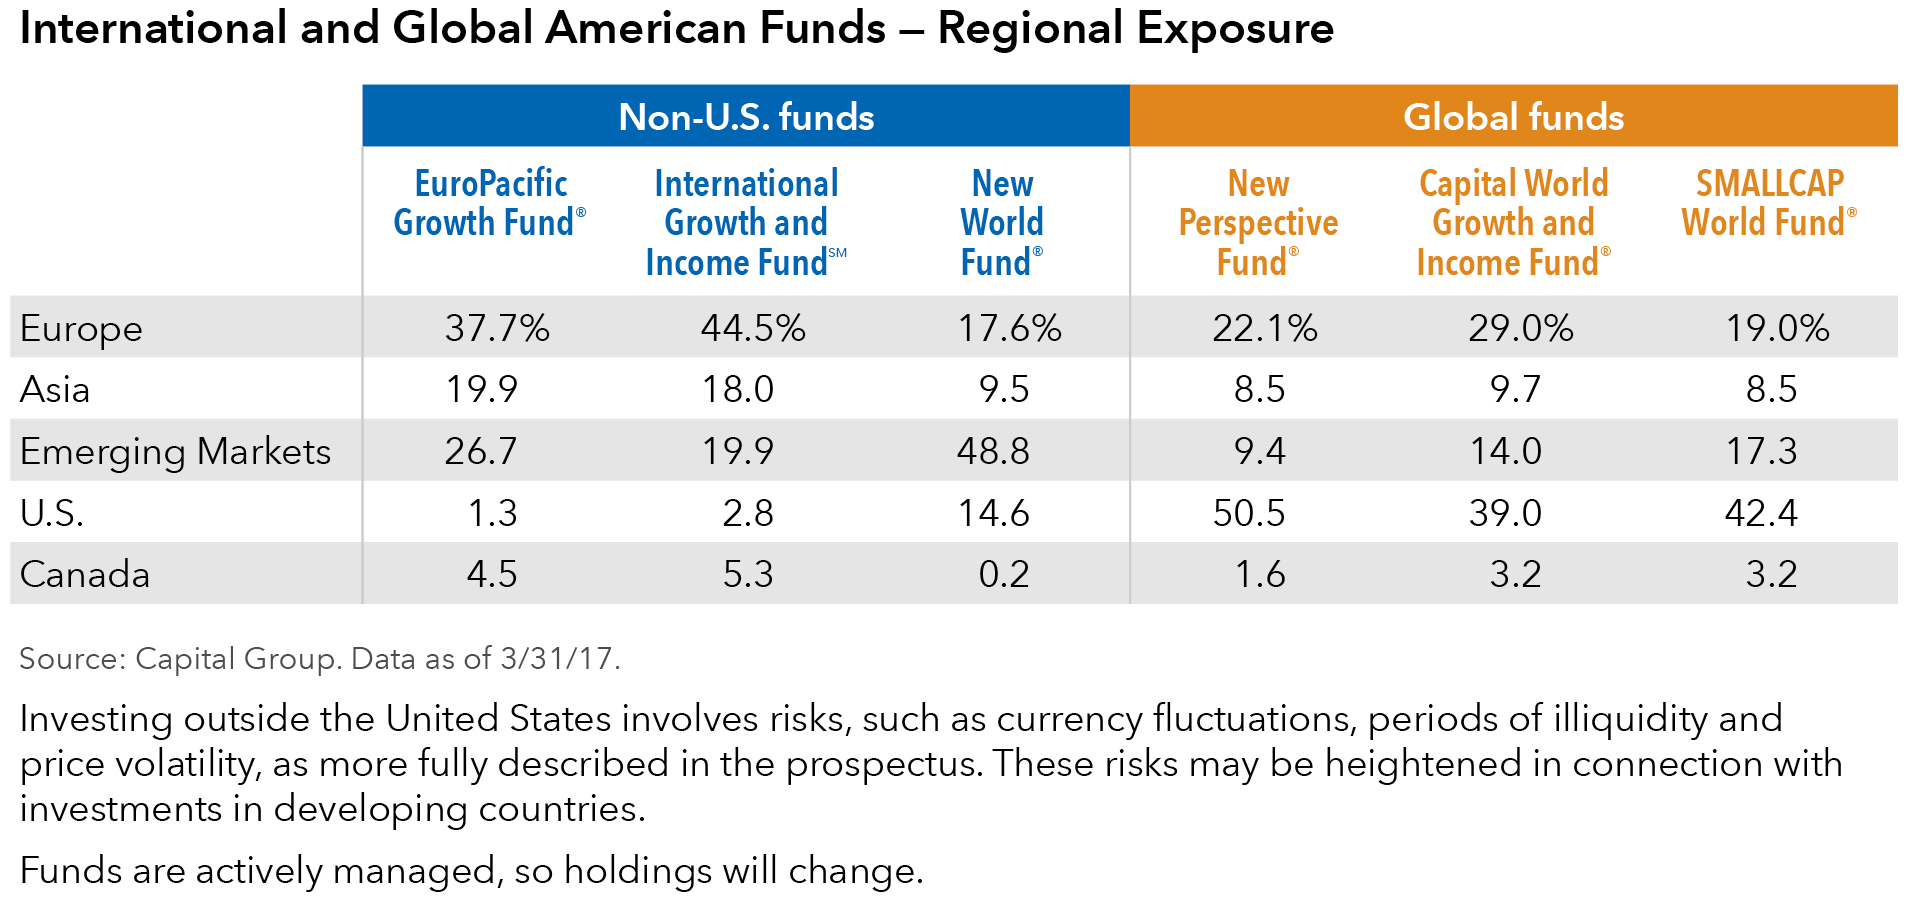 International and Global American Funds by percentage of regional exposure